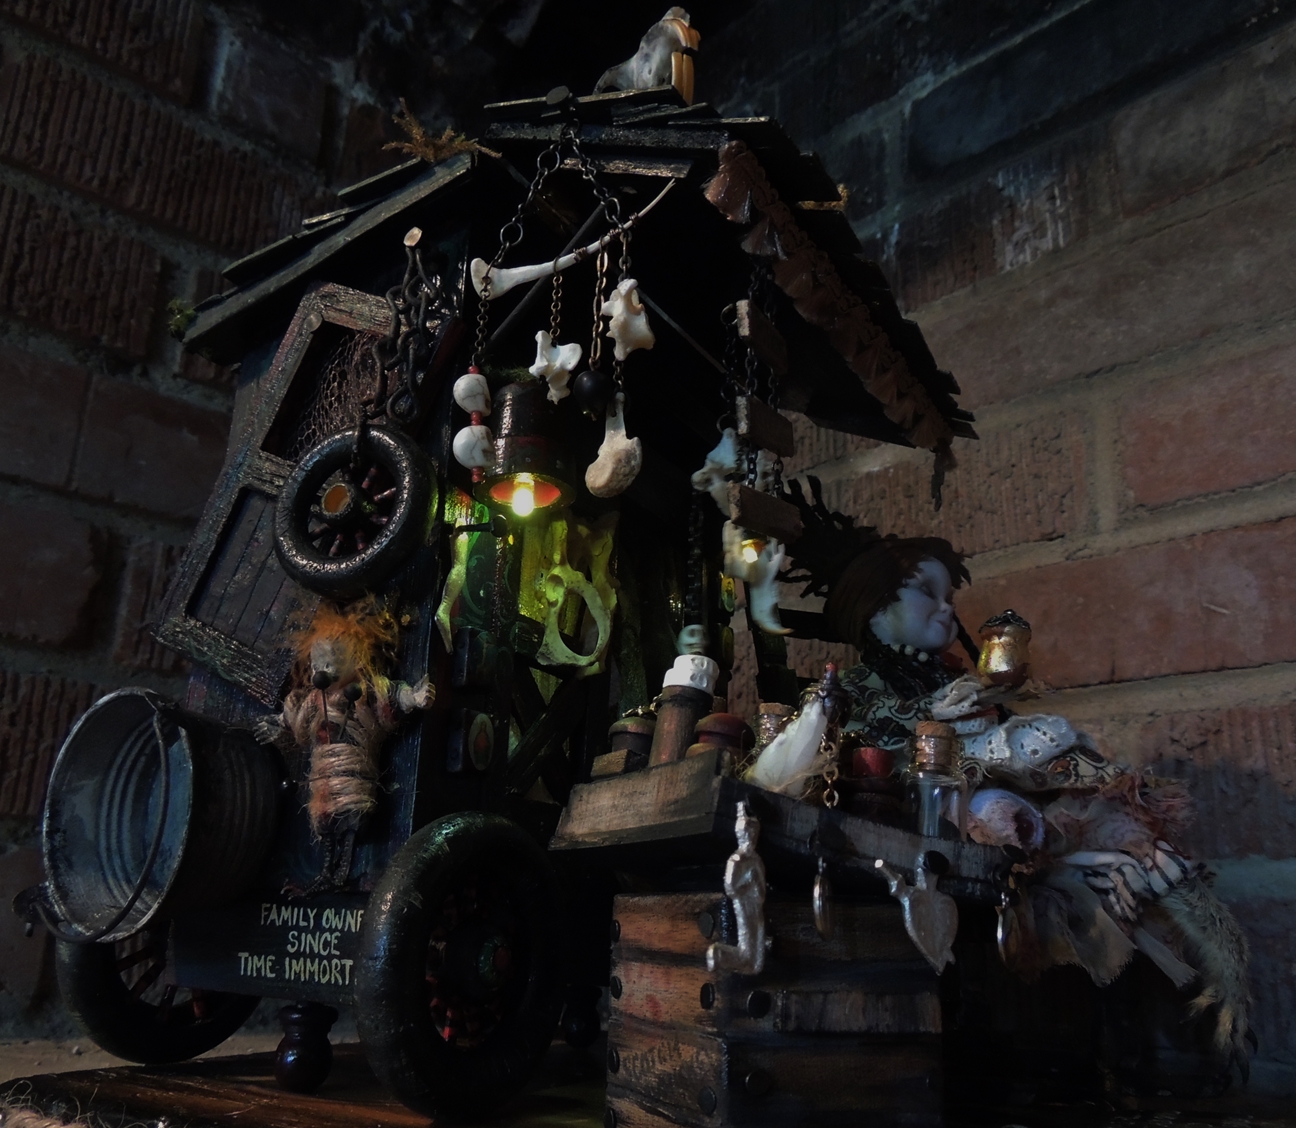 the back of Mixed Media Taxidermy Nightlight Assemblage of peddlars cart filled with bones, potions and spells